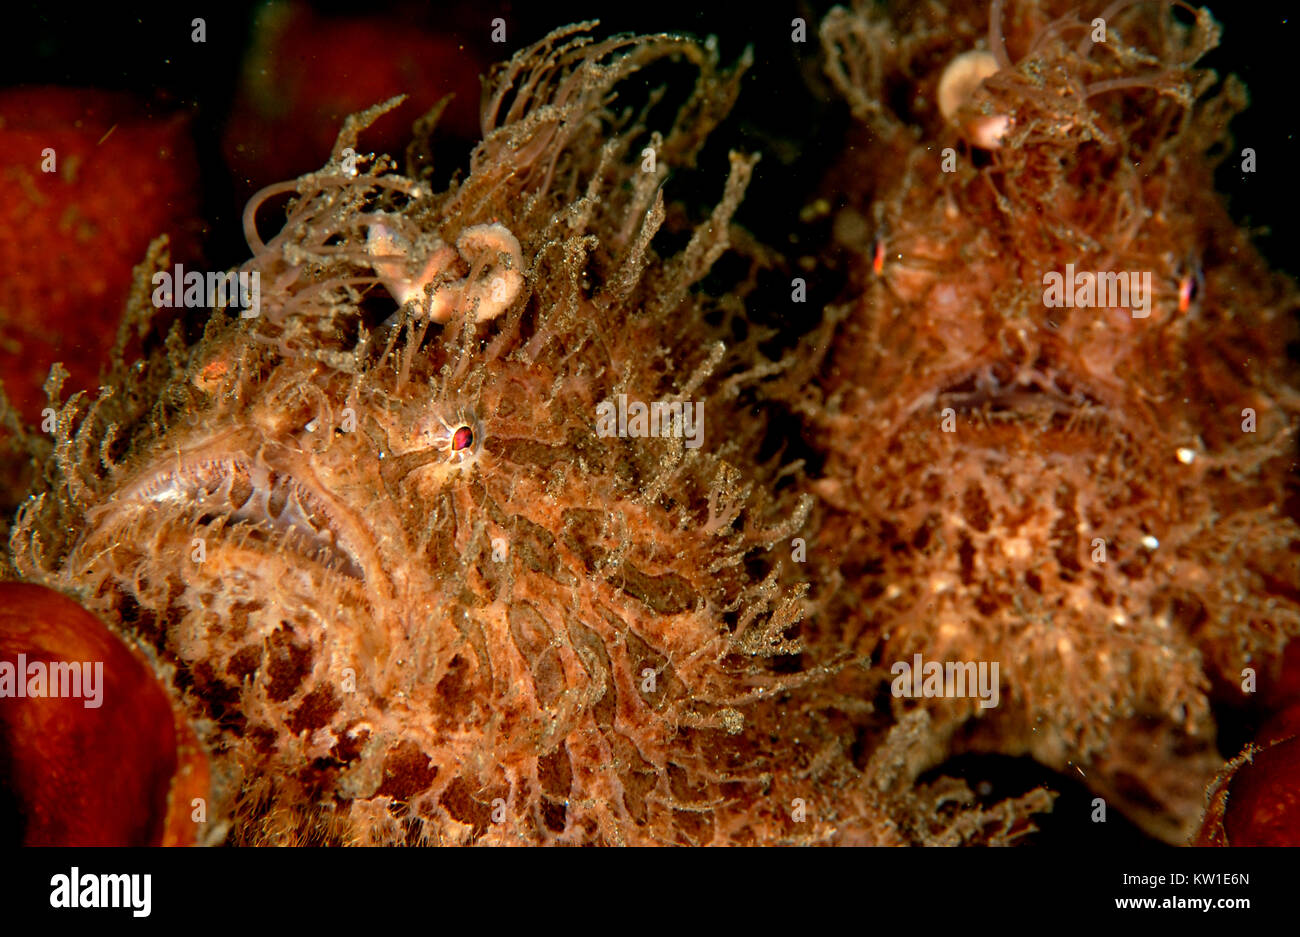 PAIR OF STRIPED FROGFISH (ANTENNURIUS STRIATUS) WITH WORM LIKE LURE - HAIRY VARIATION. ALSO KNOWN AS THE ANGLER FISH Stock Photo